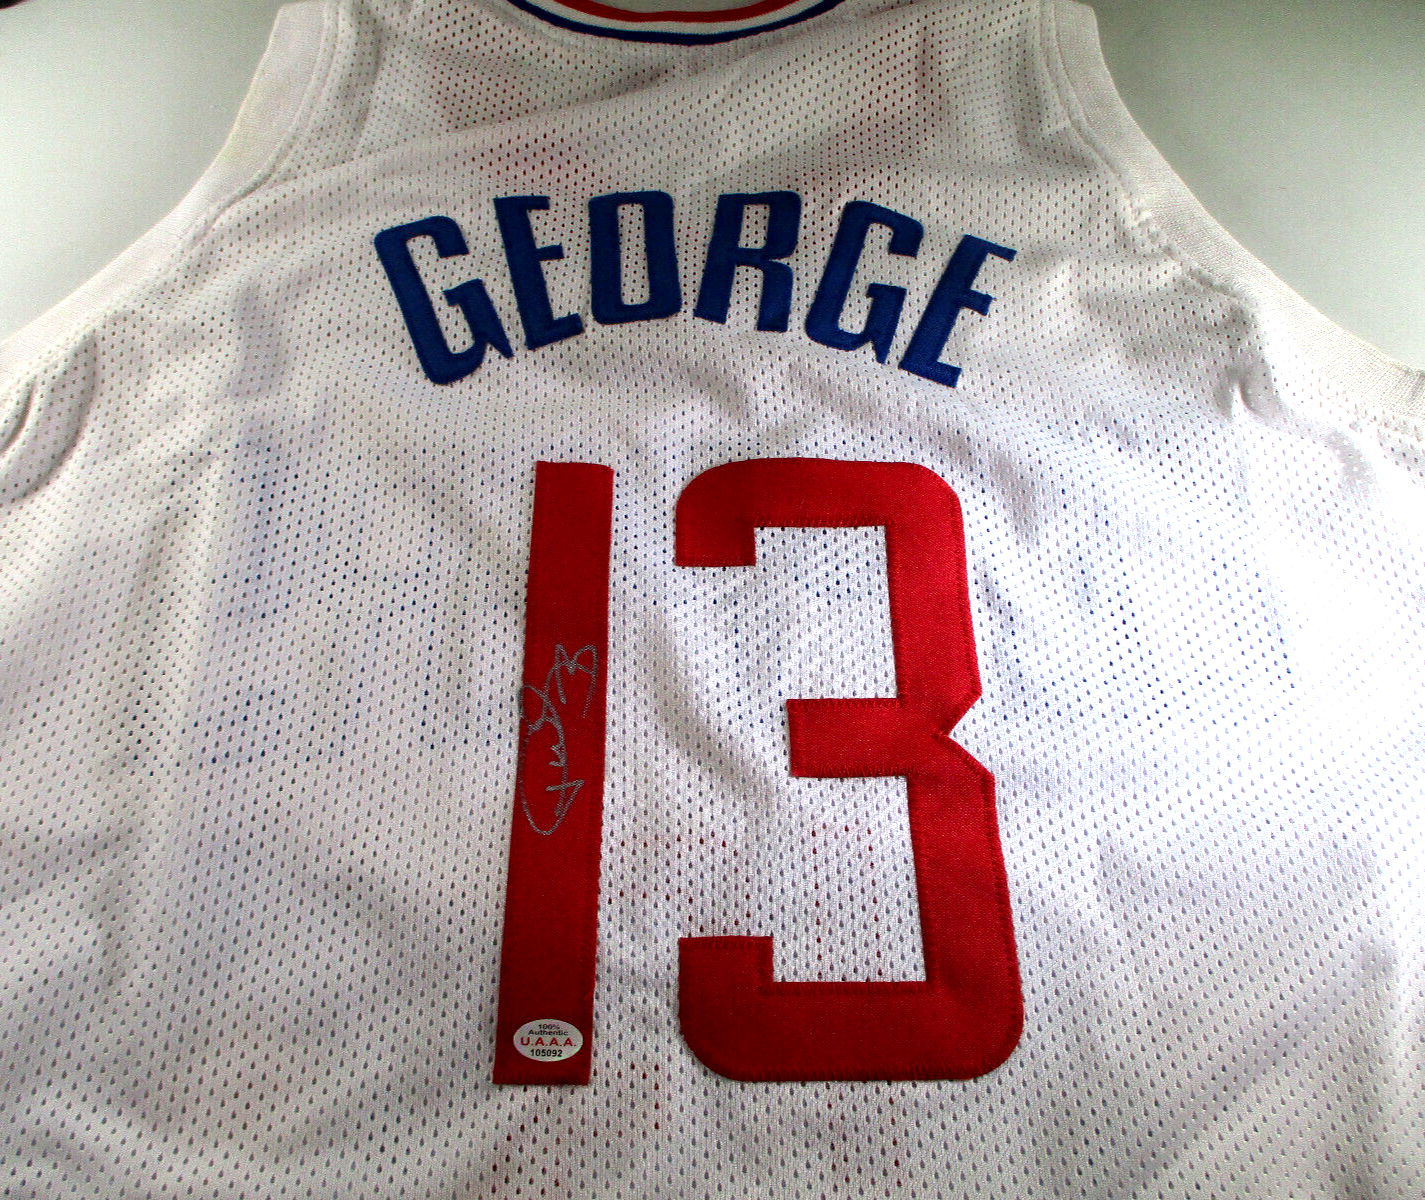 Paul Geoorge / Autographed Los Angeles Clippers Custom Basketball Jersey / COA